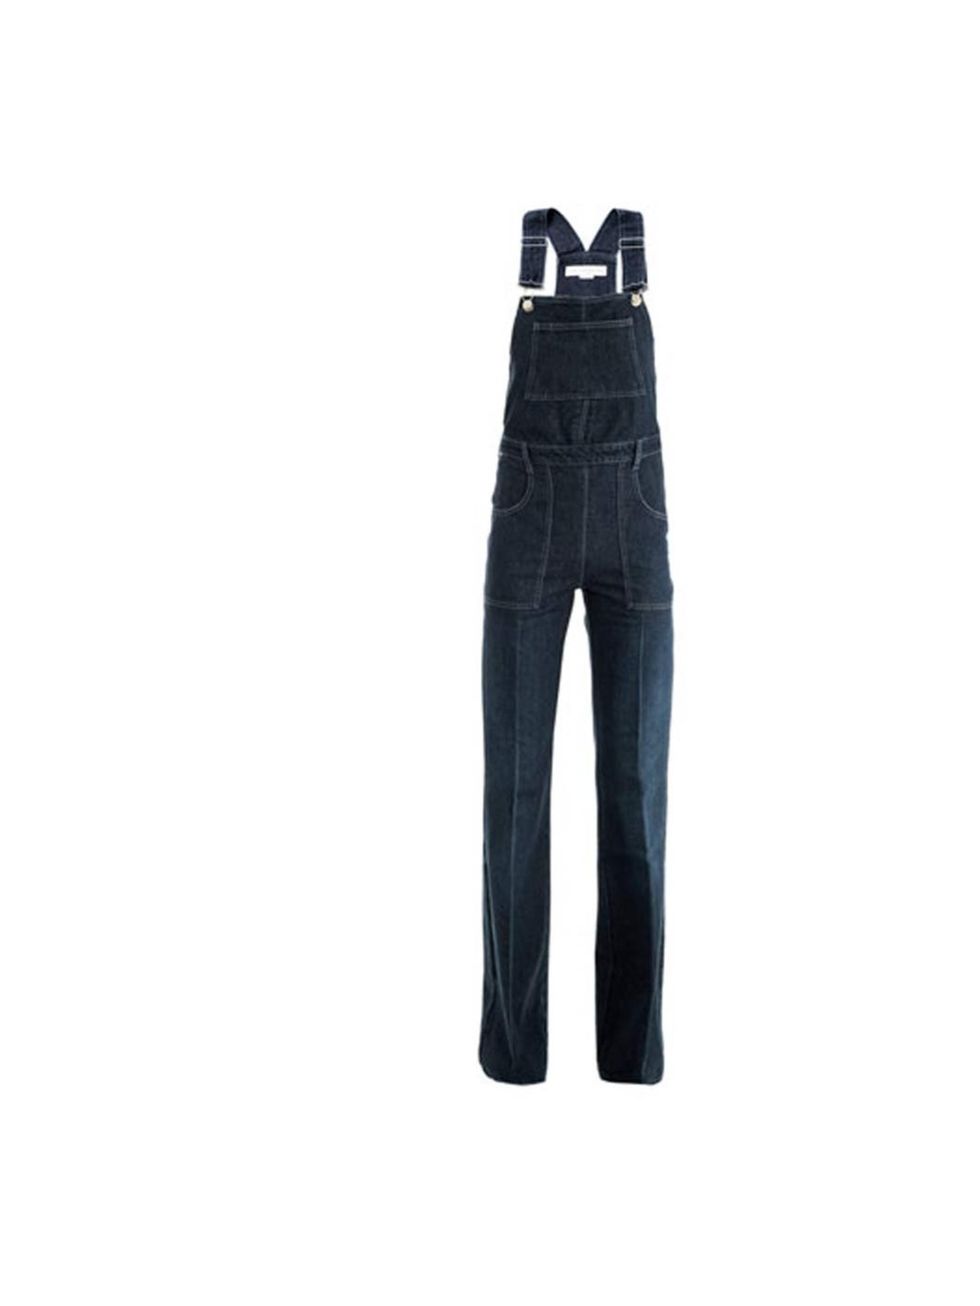 <p>Stella McCartney denim dungarees £535 at <a href="http://www.matchesfashion.com/product/144950">Matches</a></p>